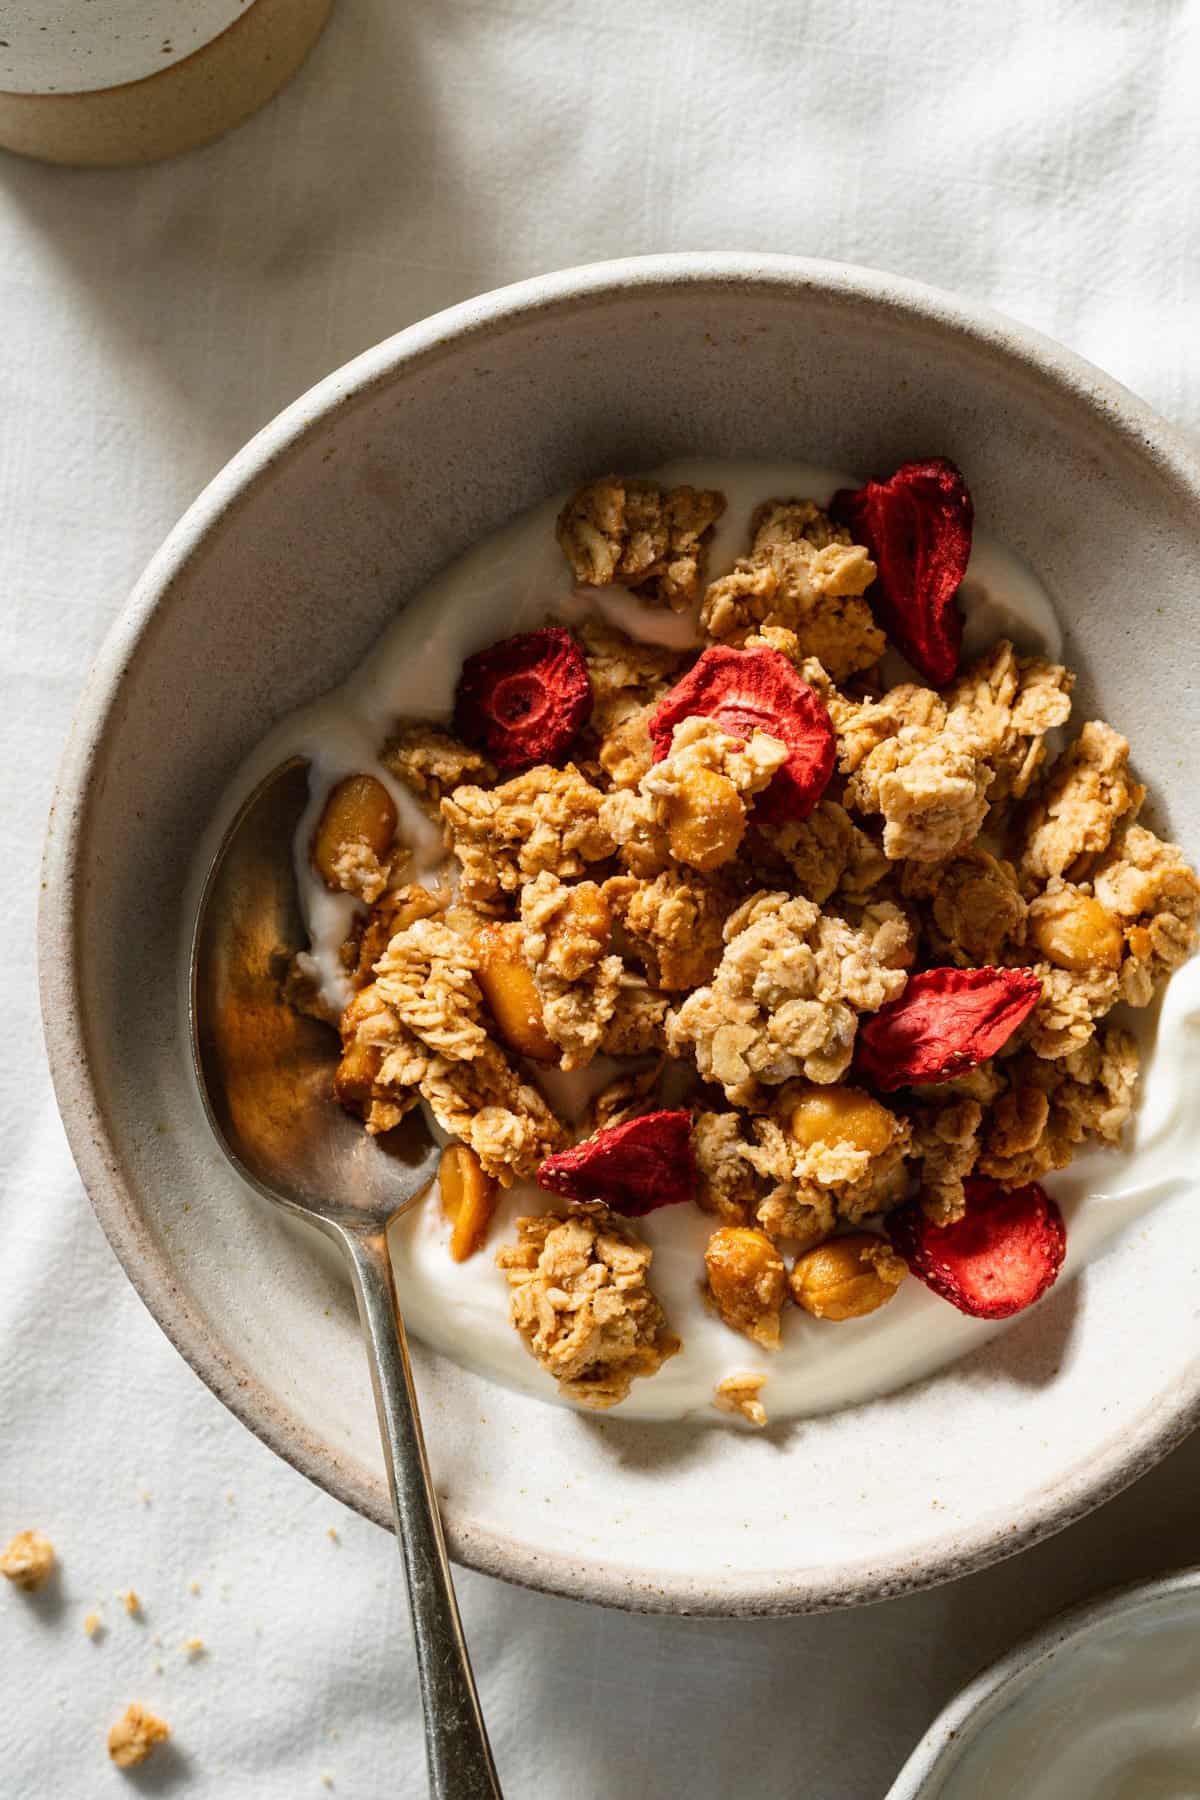 A bowl of granola served on top of yoghurt with a spoon.